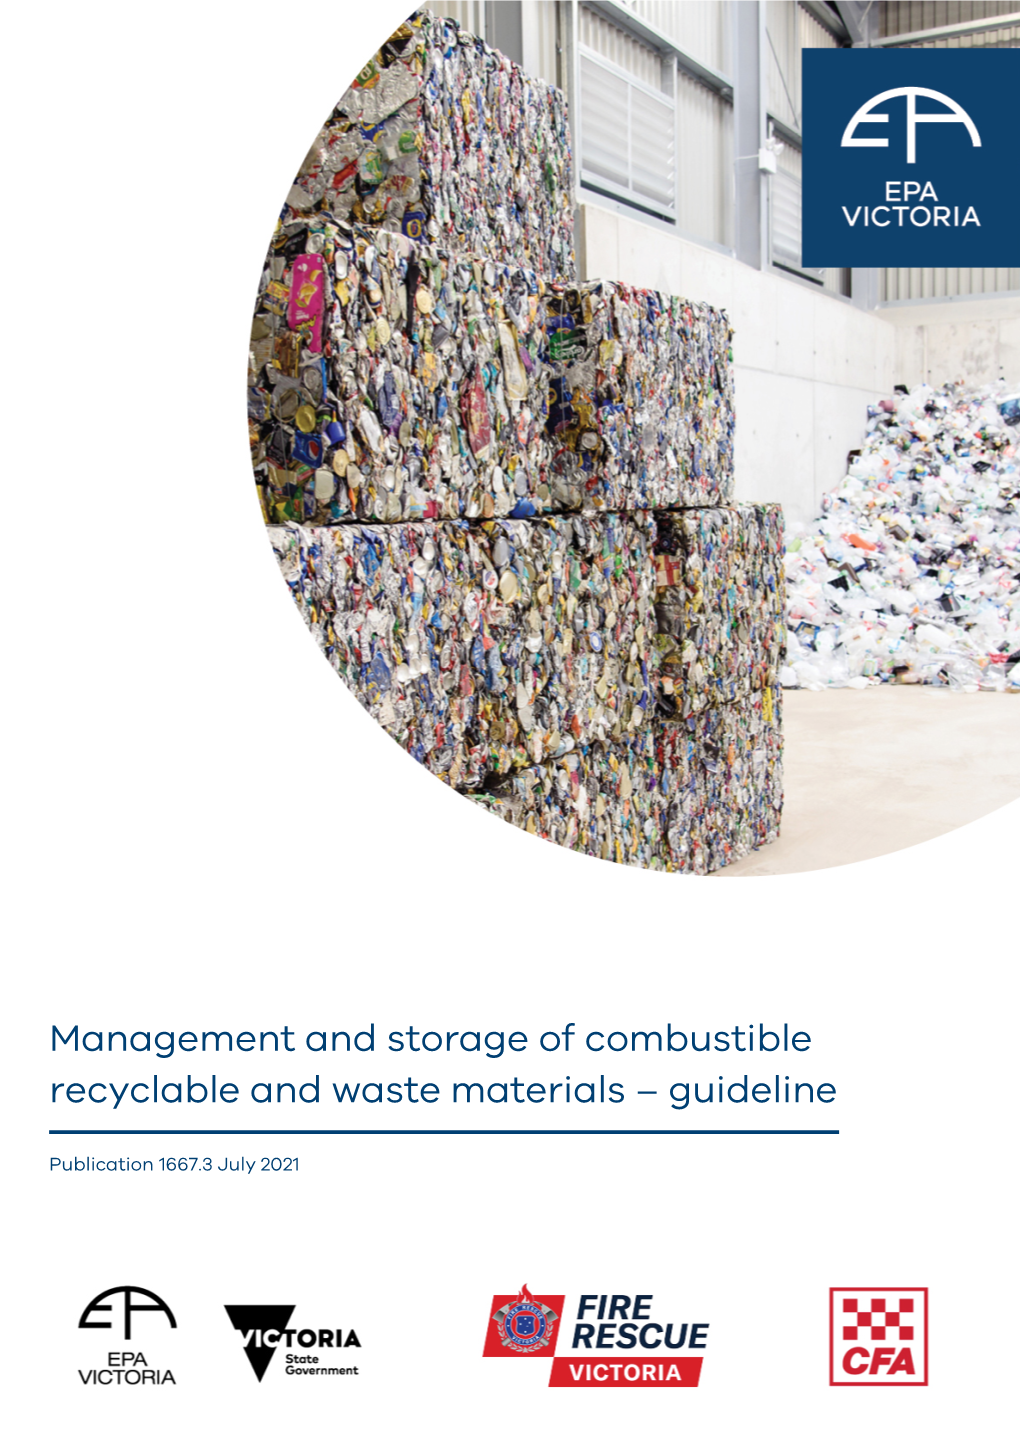 Management and Storage of Combustible Recyclable and Waste Materials – Guideline